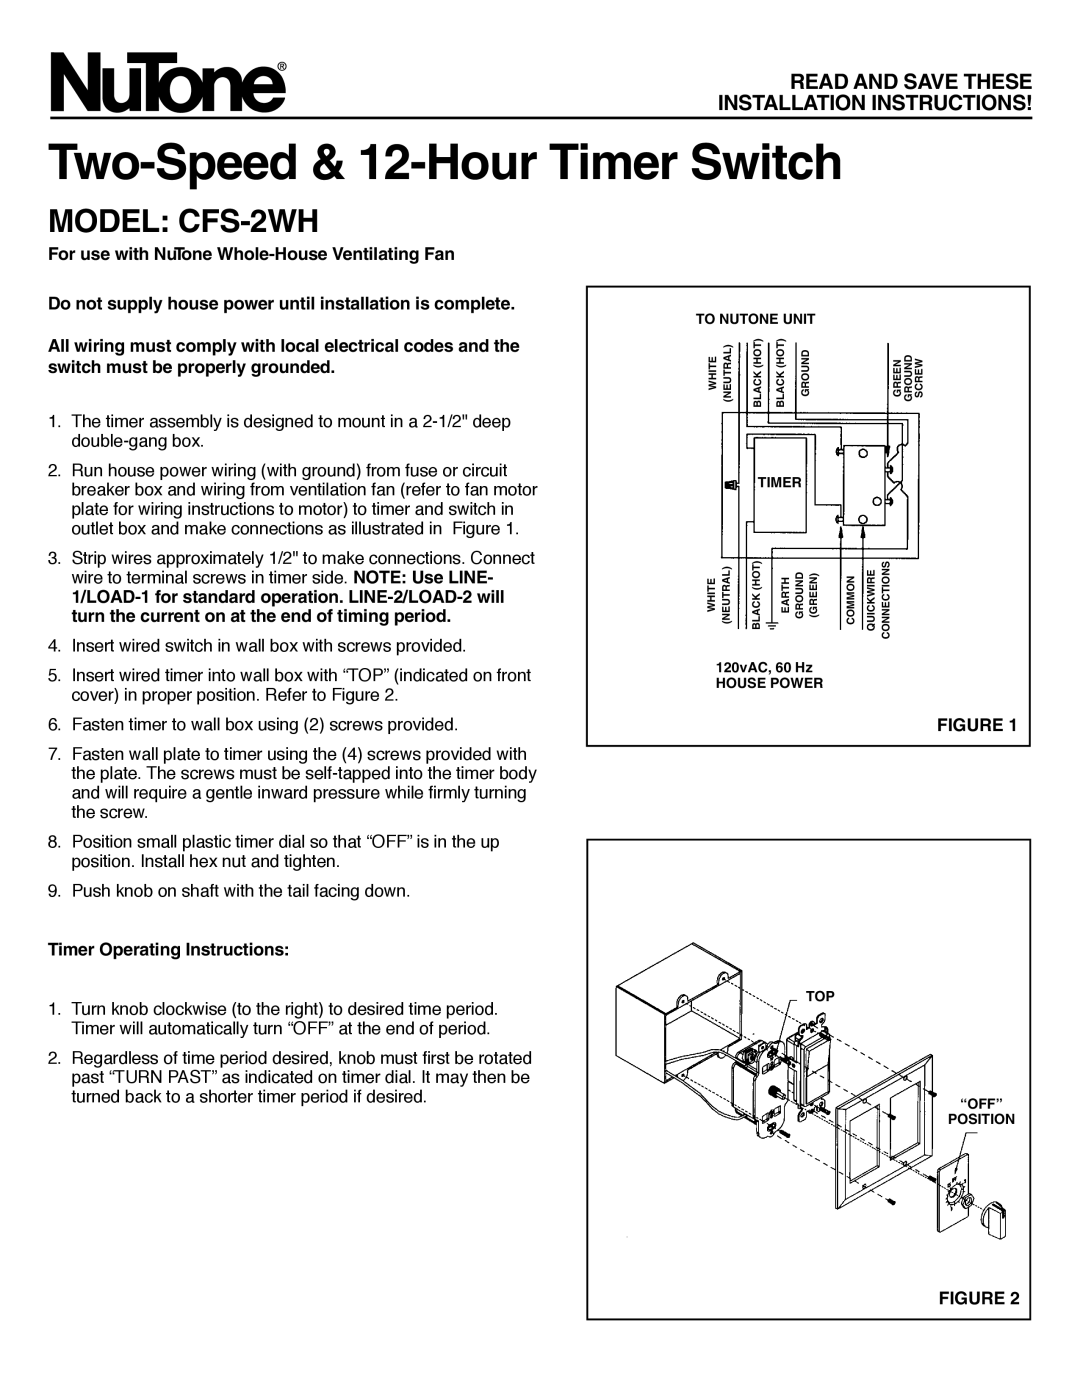 NuTone installation instructions Two-Speed& 12-HourTimer Switch, MODEL: CFS-2WH, Timer Operating Instructions, Figure 